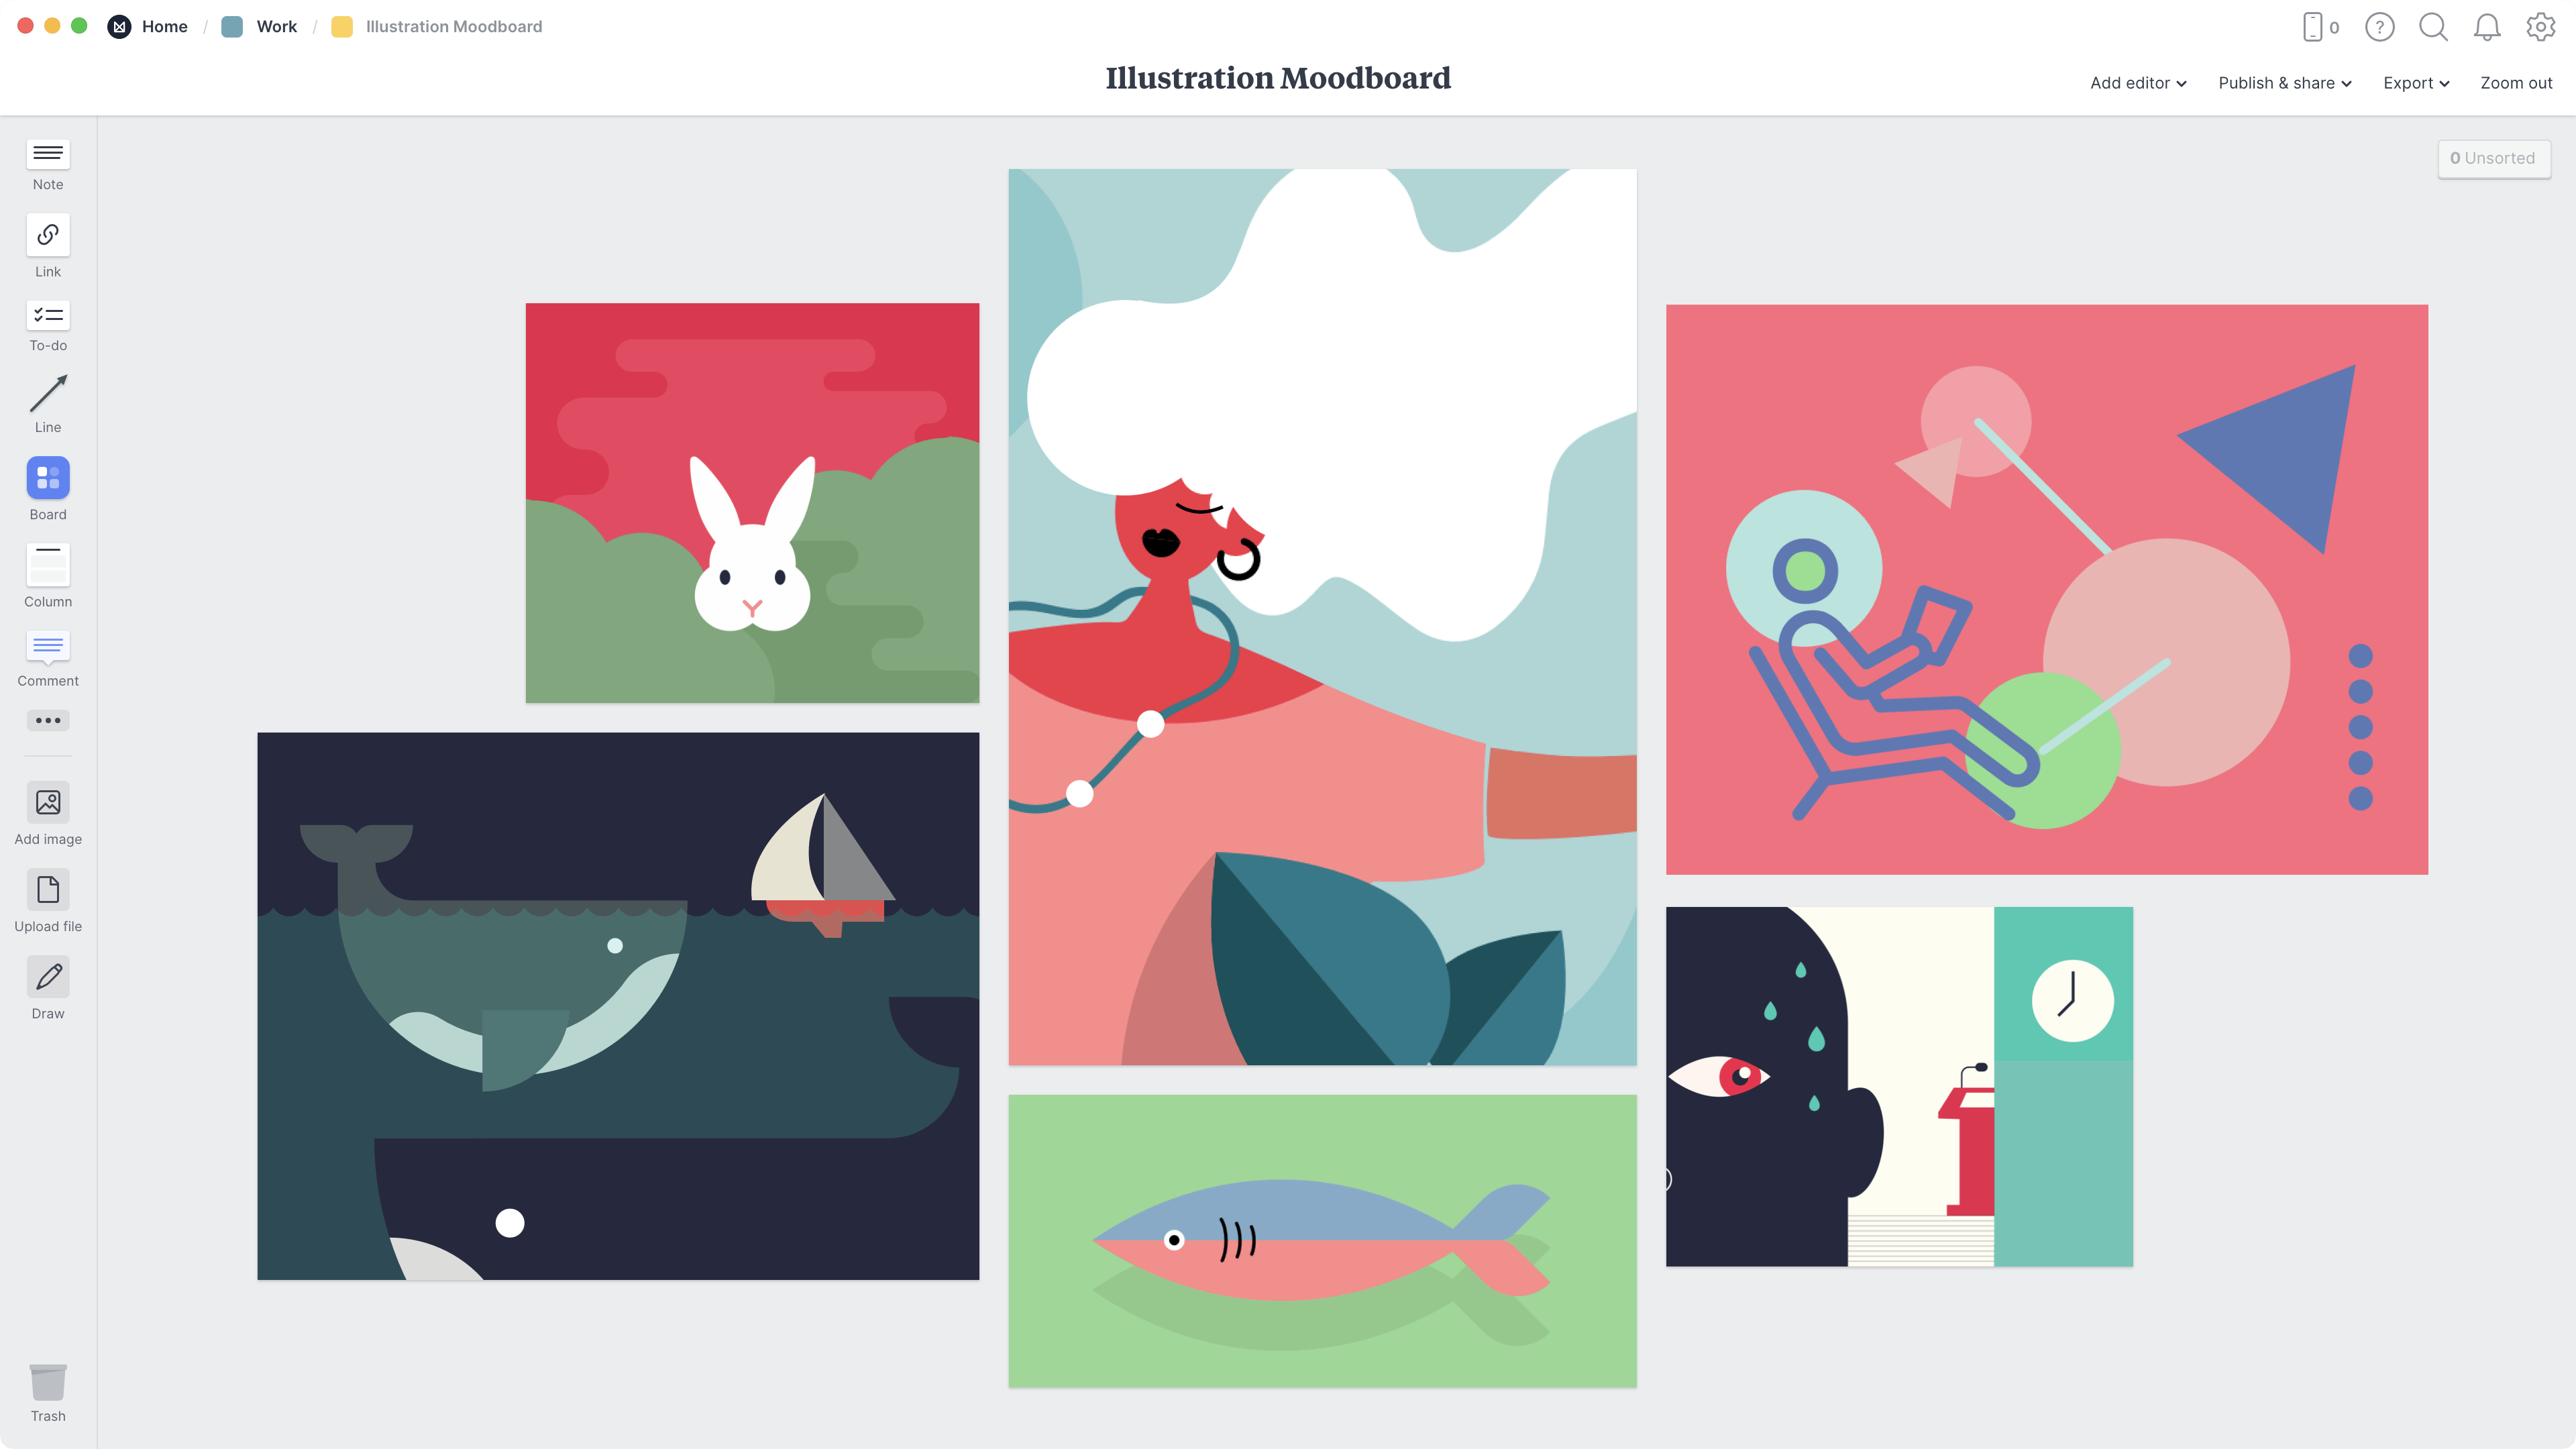 Illustrative Moodboard Template, within the Milanote app